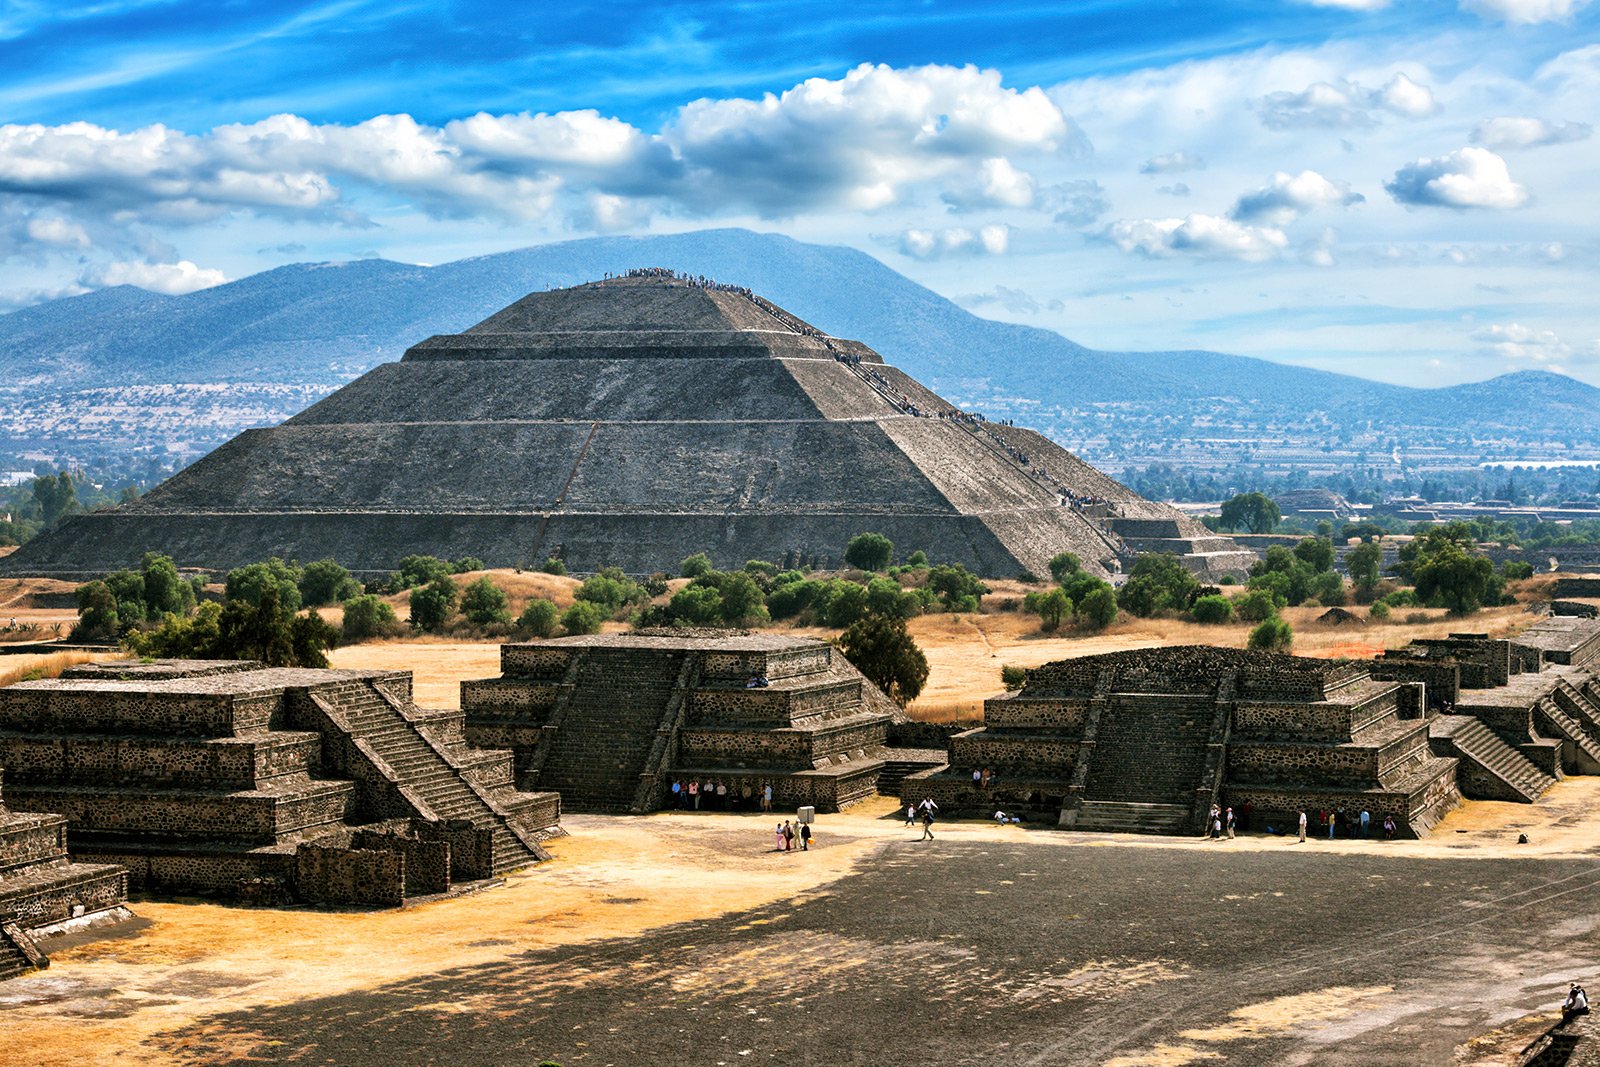 Teotihuacan, Mexico City